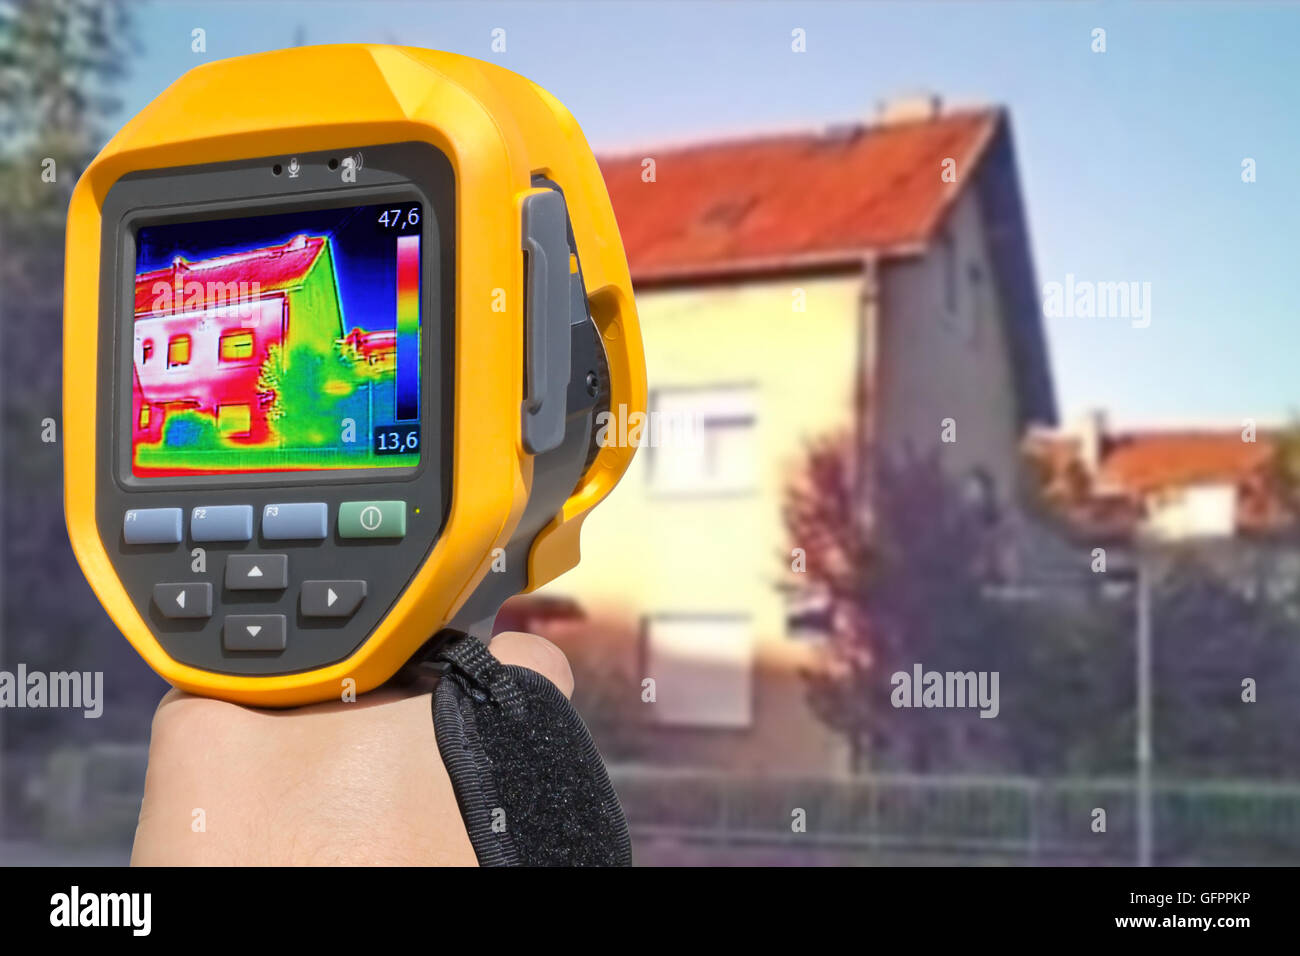 Recording Heat Loss at the Residential Building With Infrared Thermal Camera Stock Photo